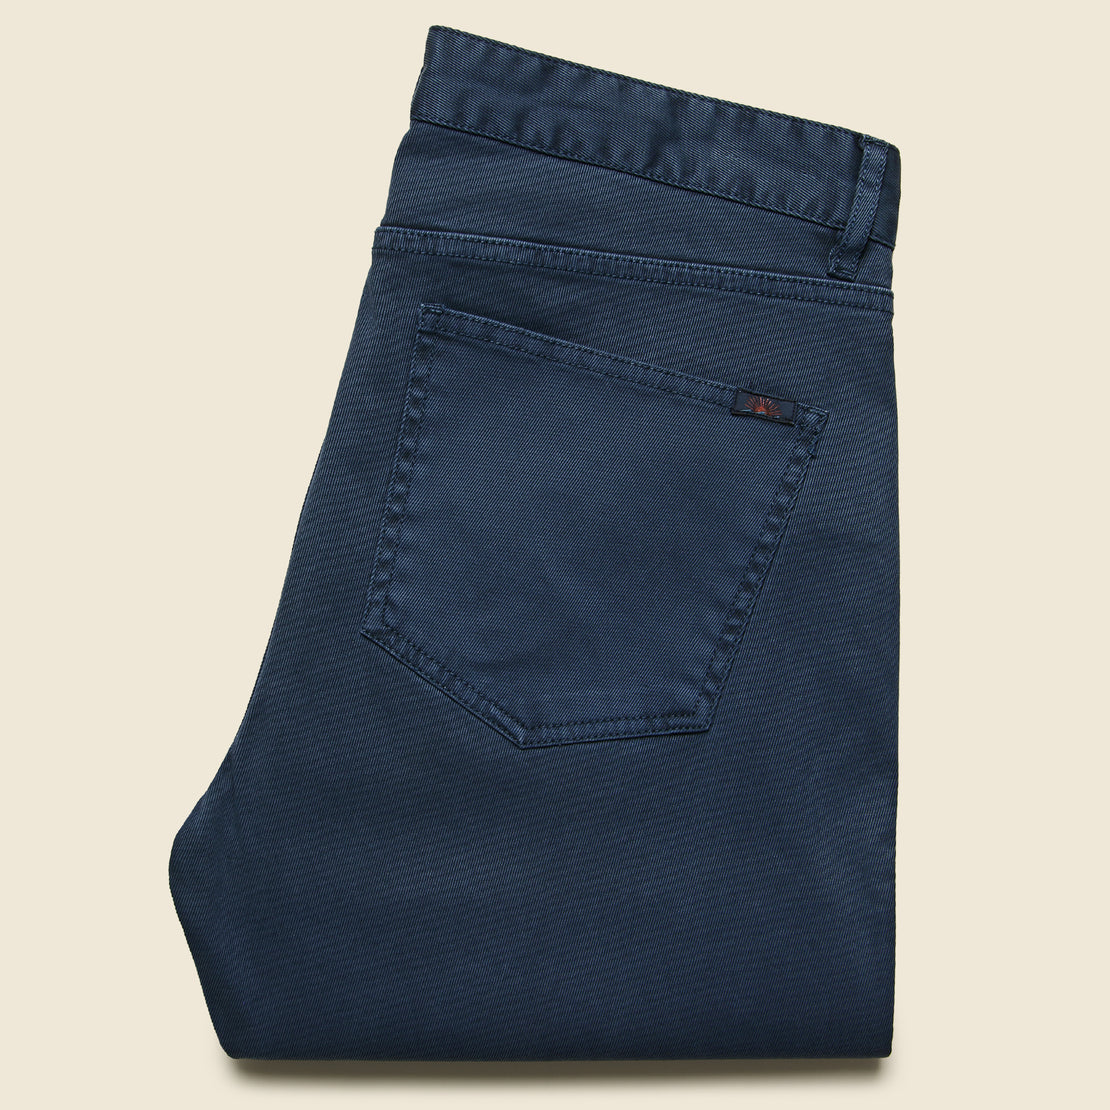 Comfort Twill Jean - Navy - Faherty - STAG Provisions - Pants - Twill